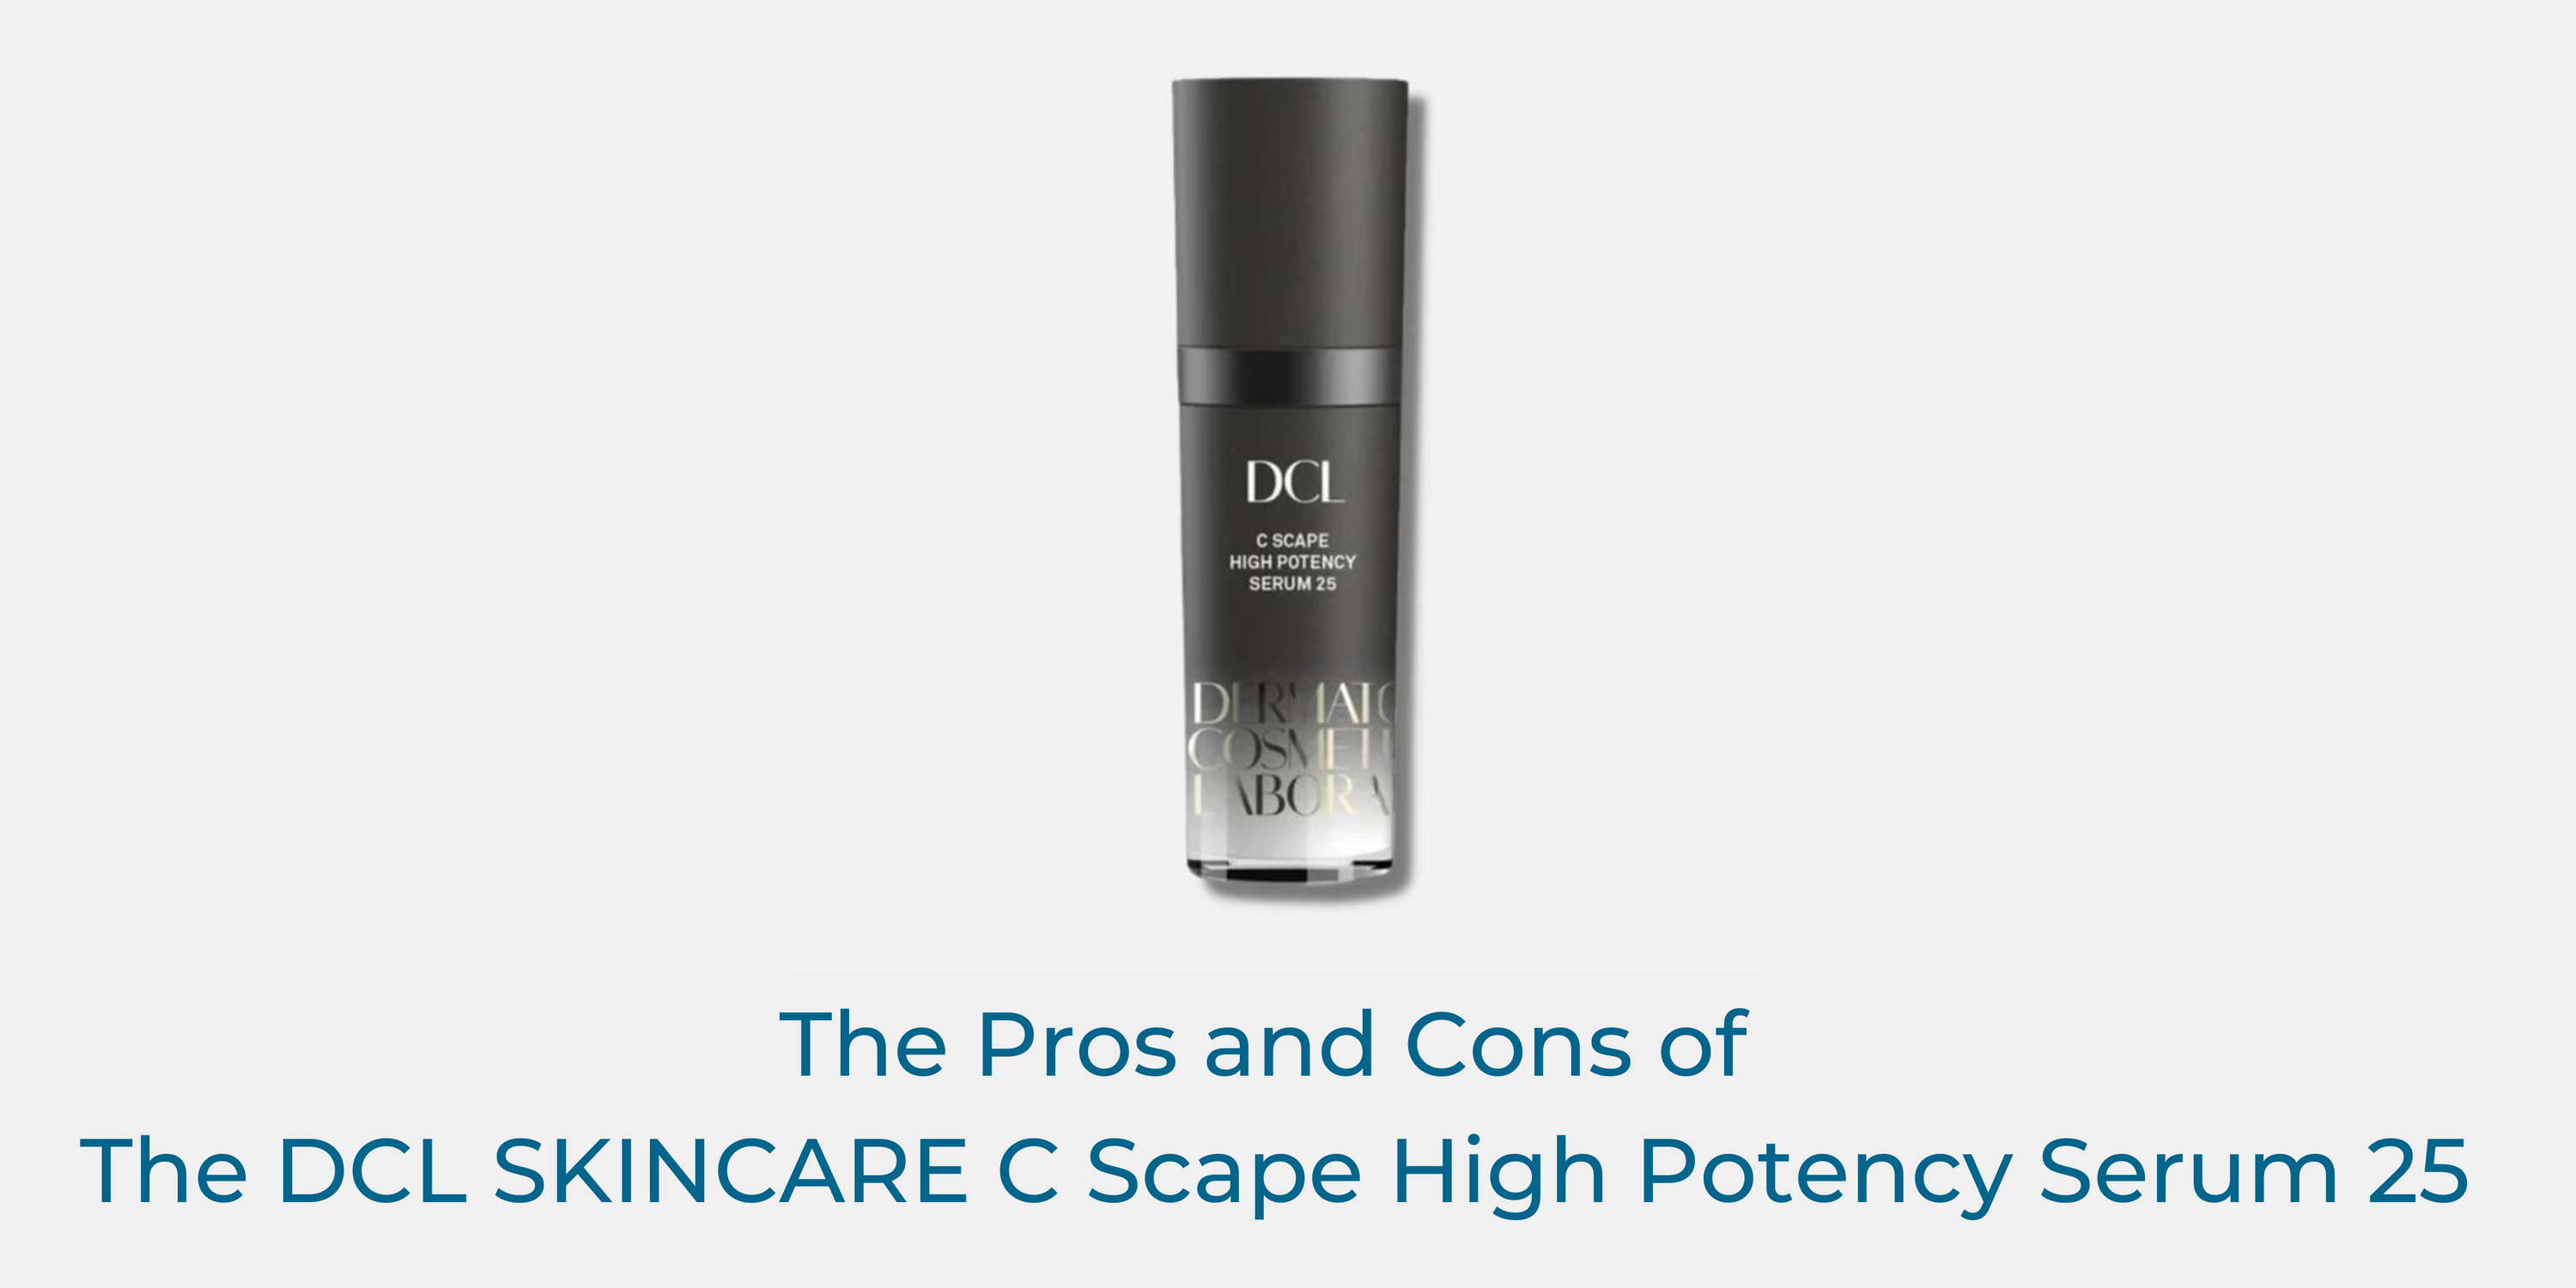 The Pros And Cons of The DCL SKINCARE C Scape High Potency Serum 25